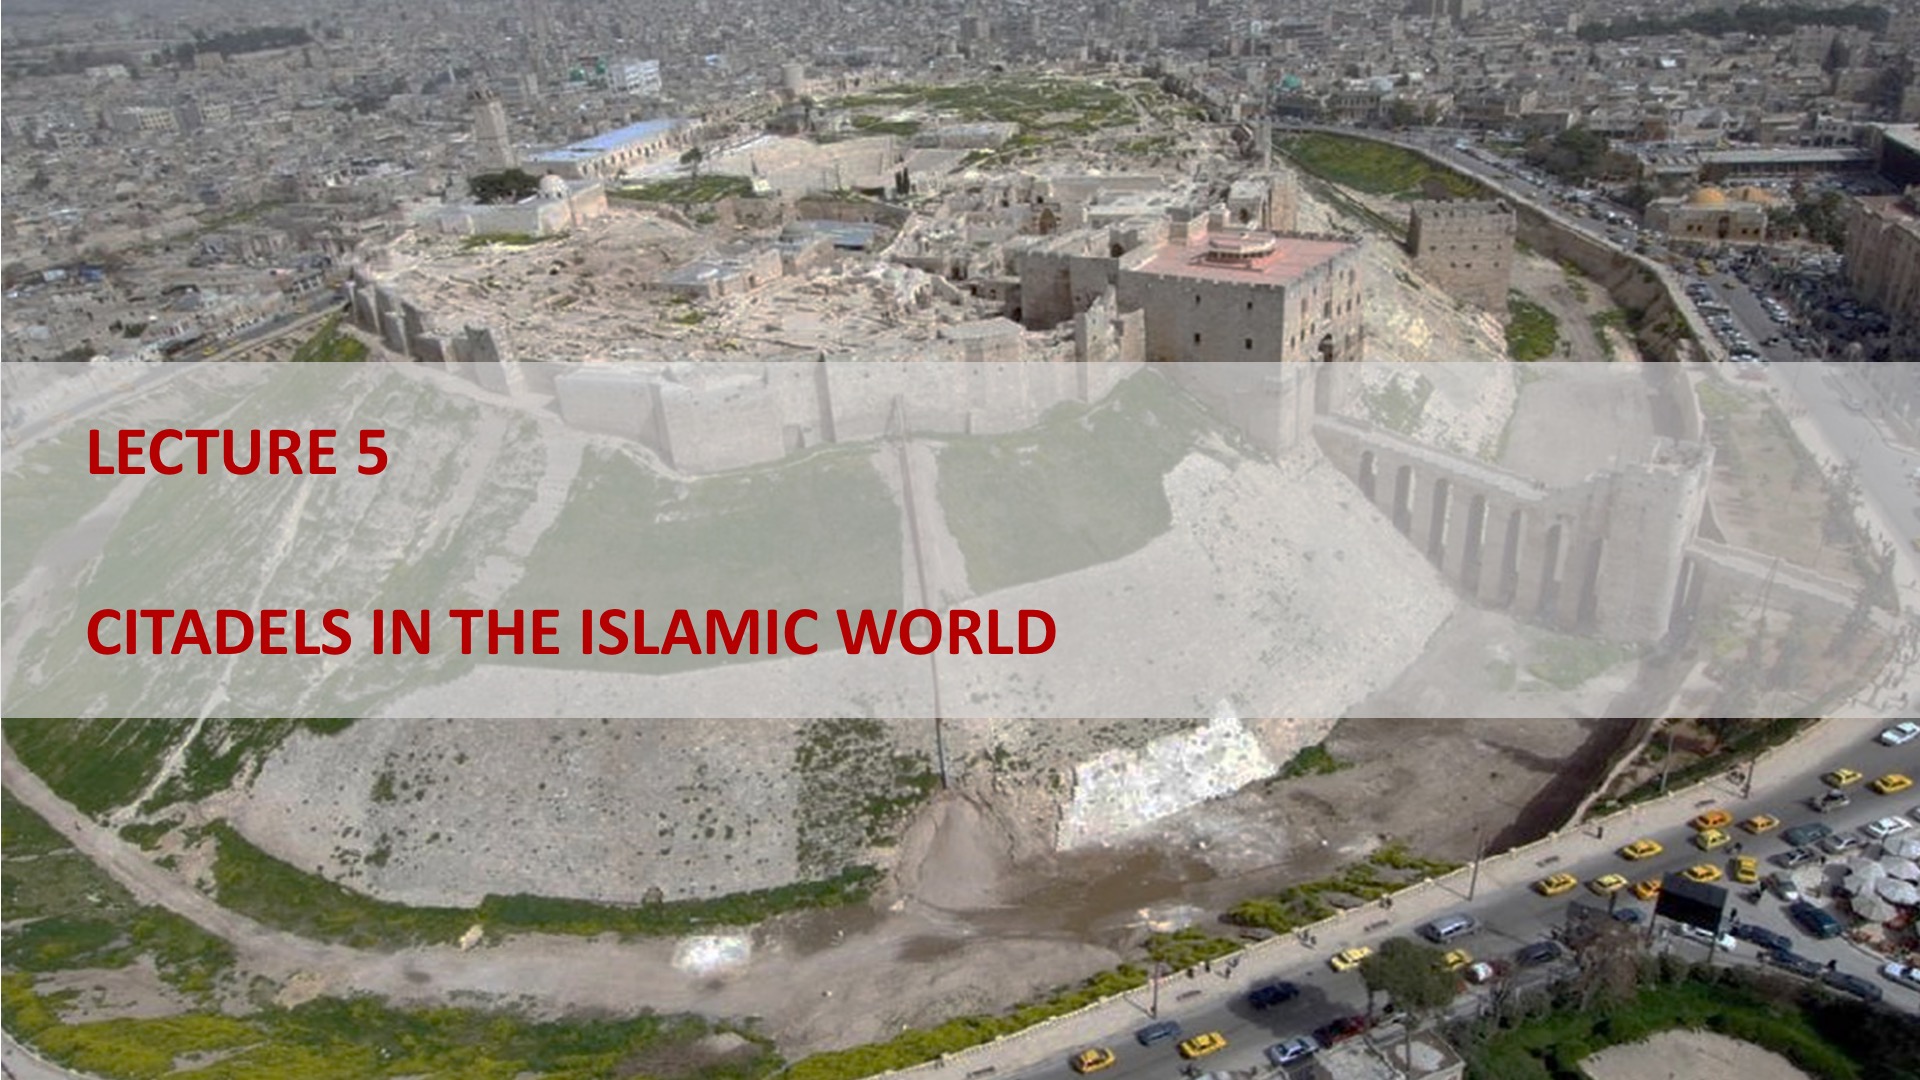 Lecture 5: Citadels in the Islamic World